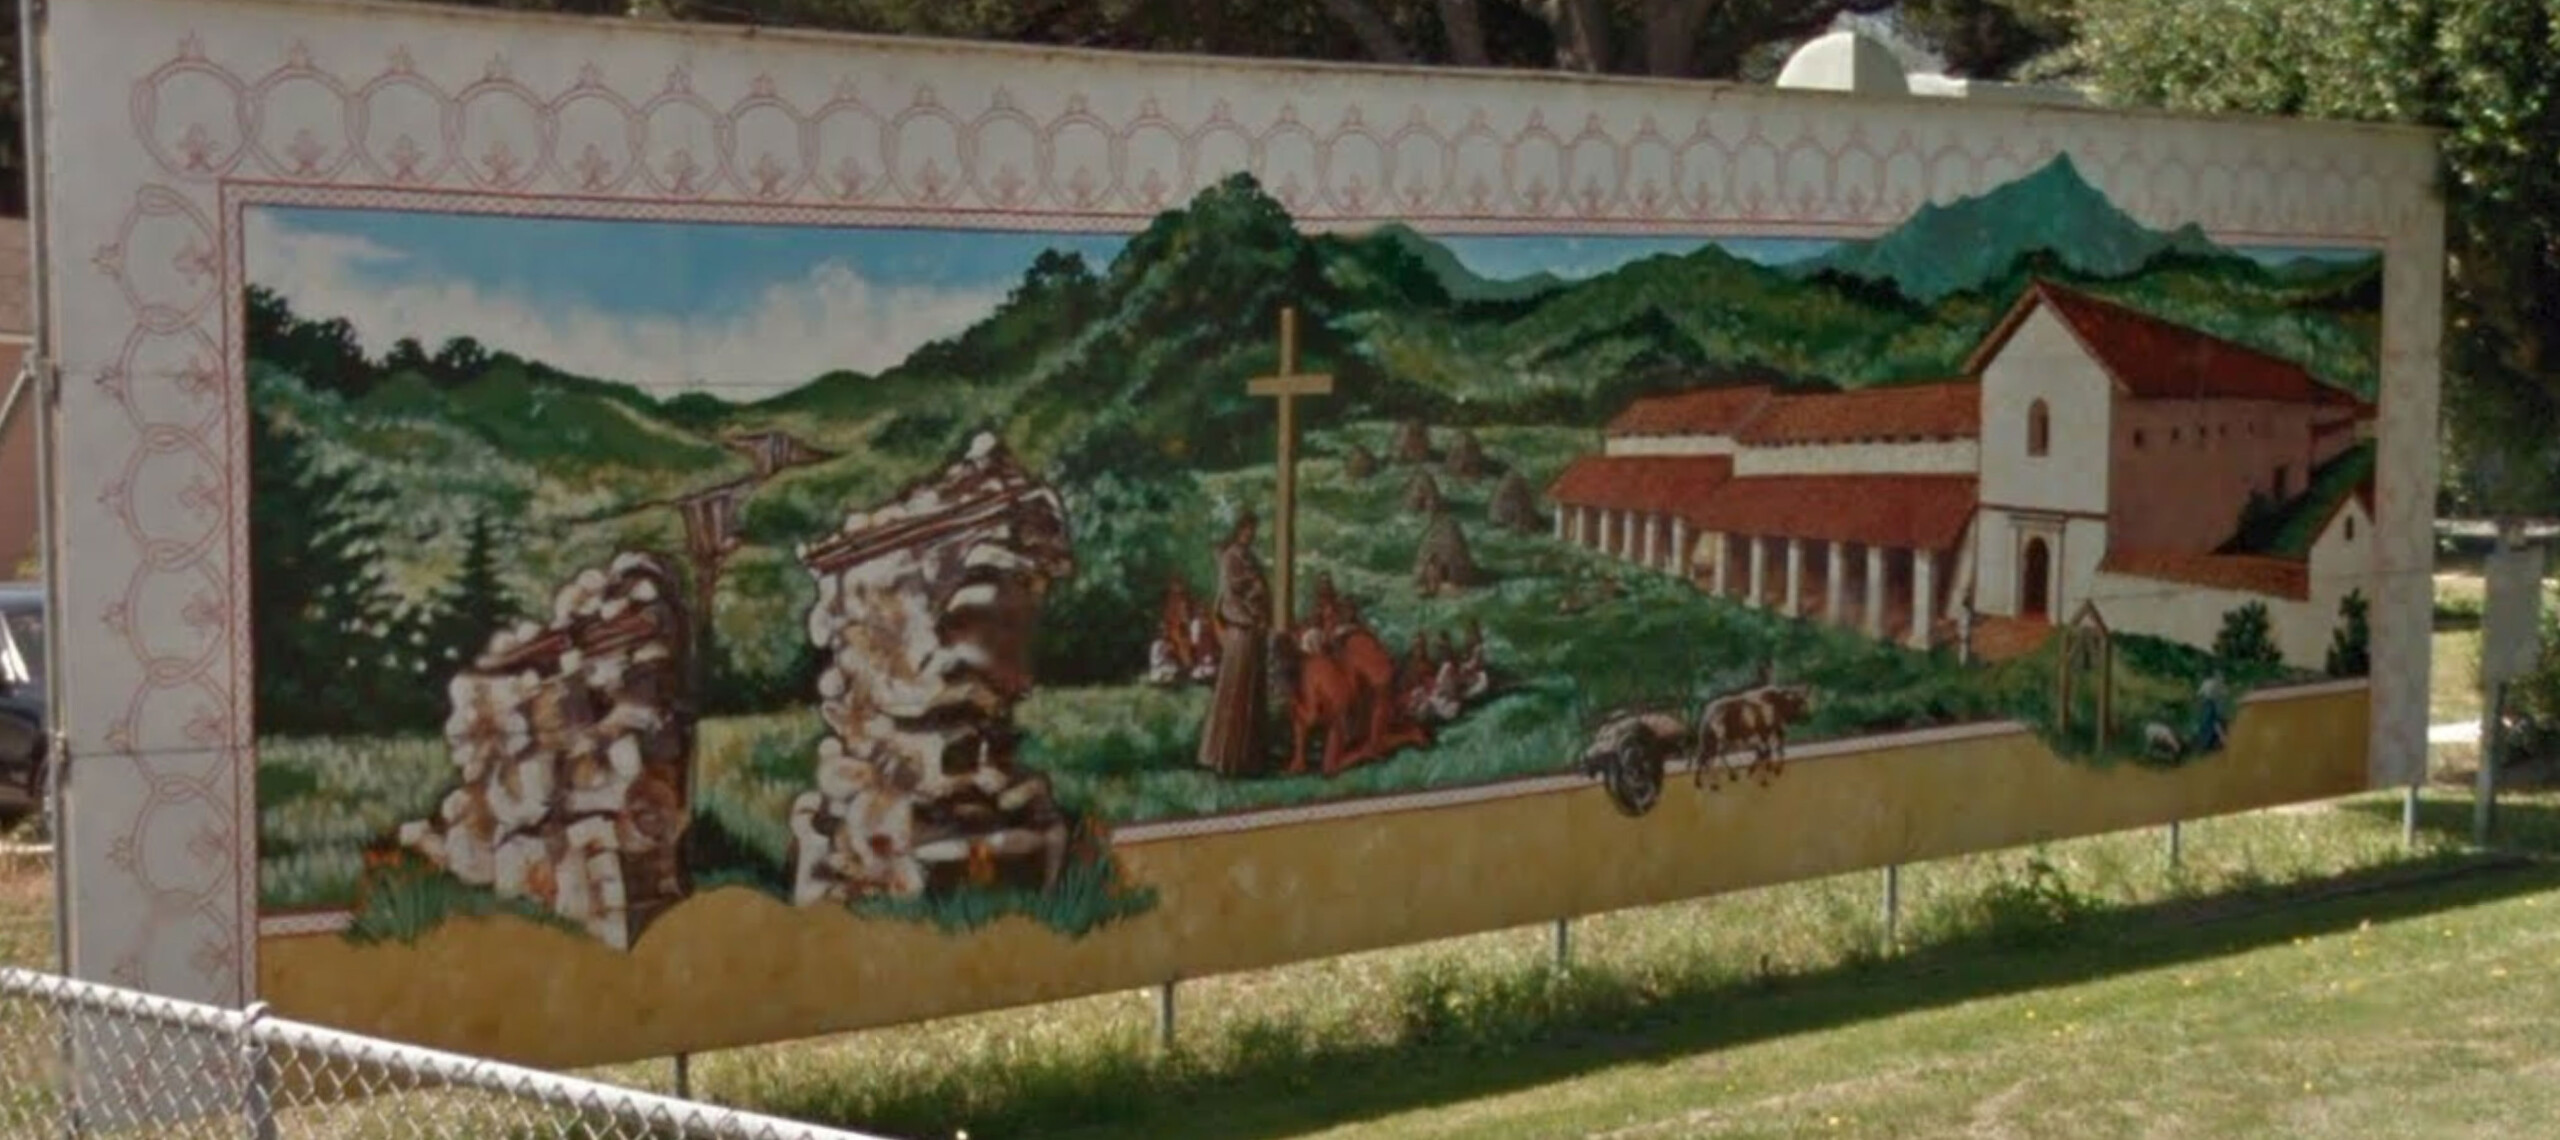 Lompoc Mural - Lost Mission (1996) - Located at 200 South H St. (behind Lompoc Museum)